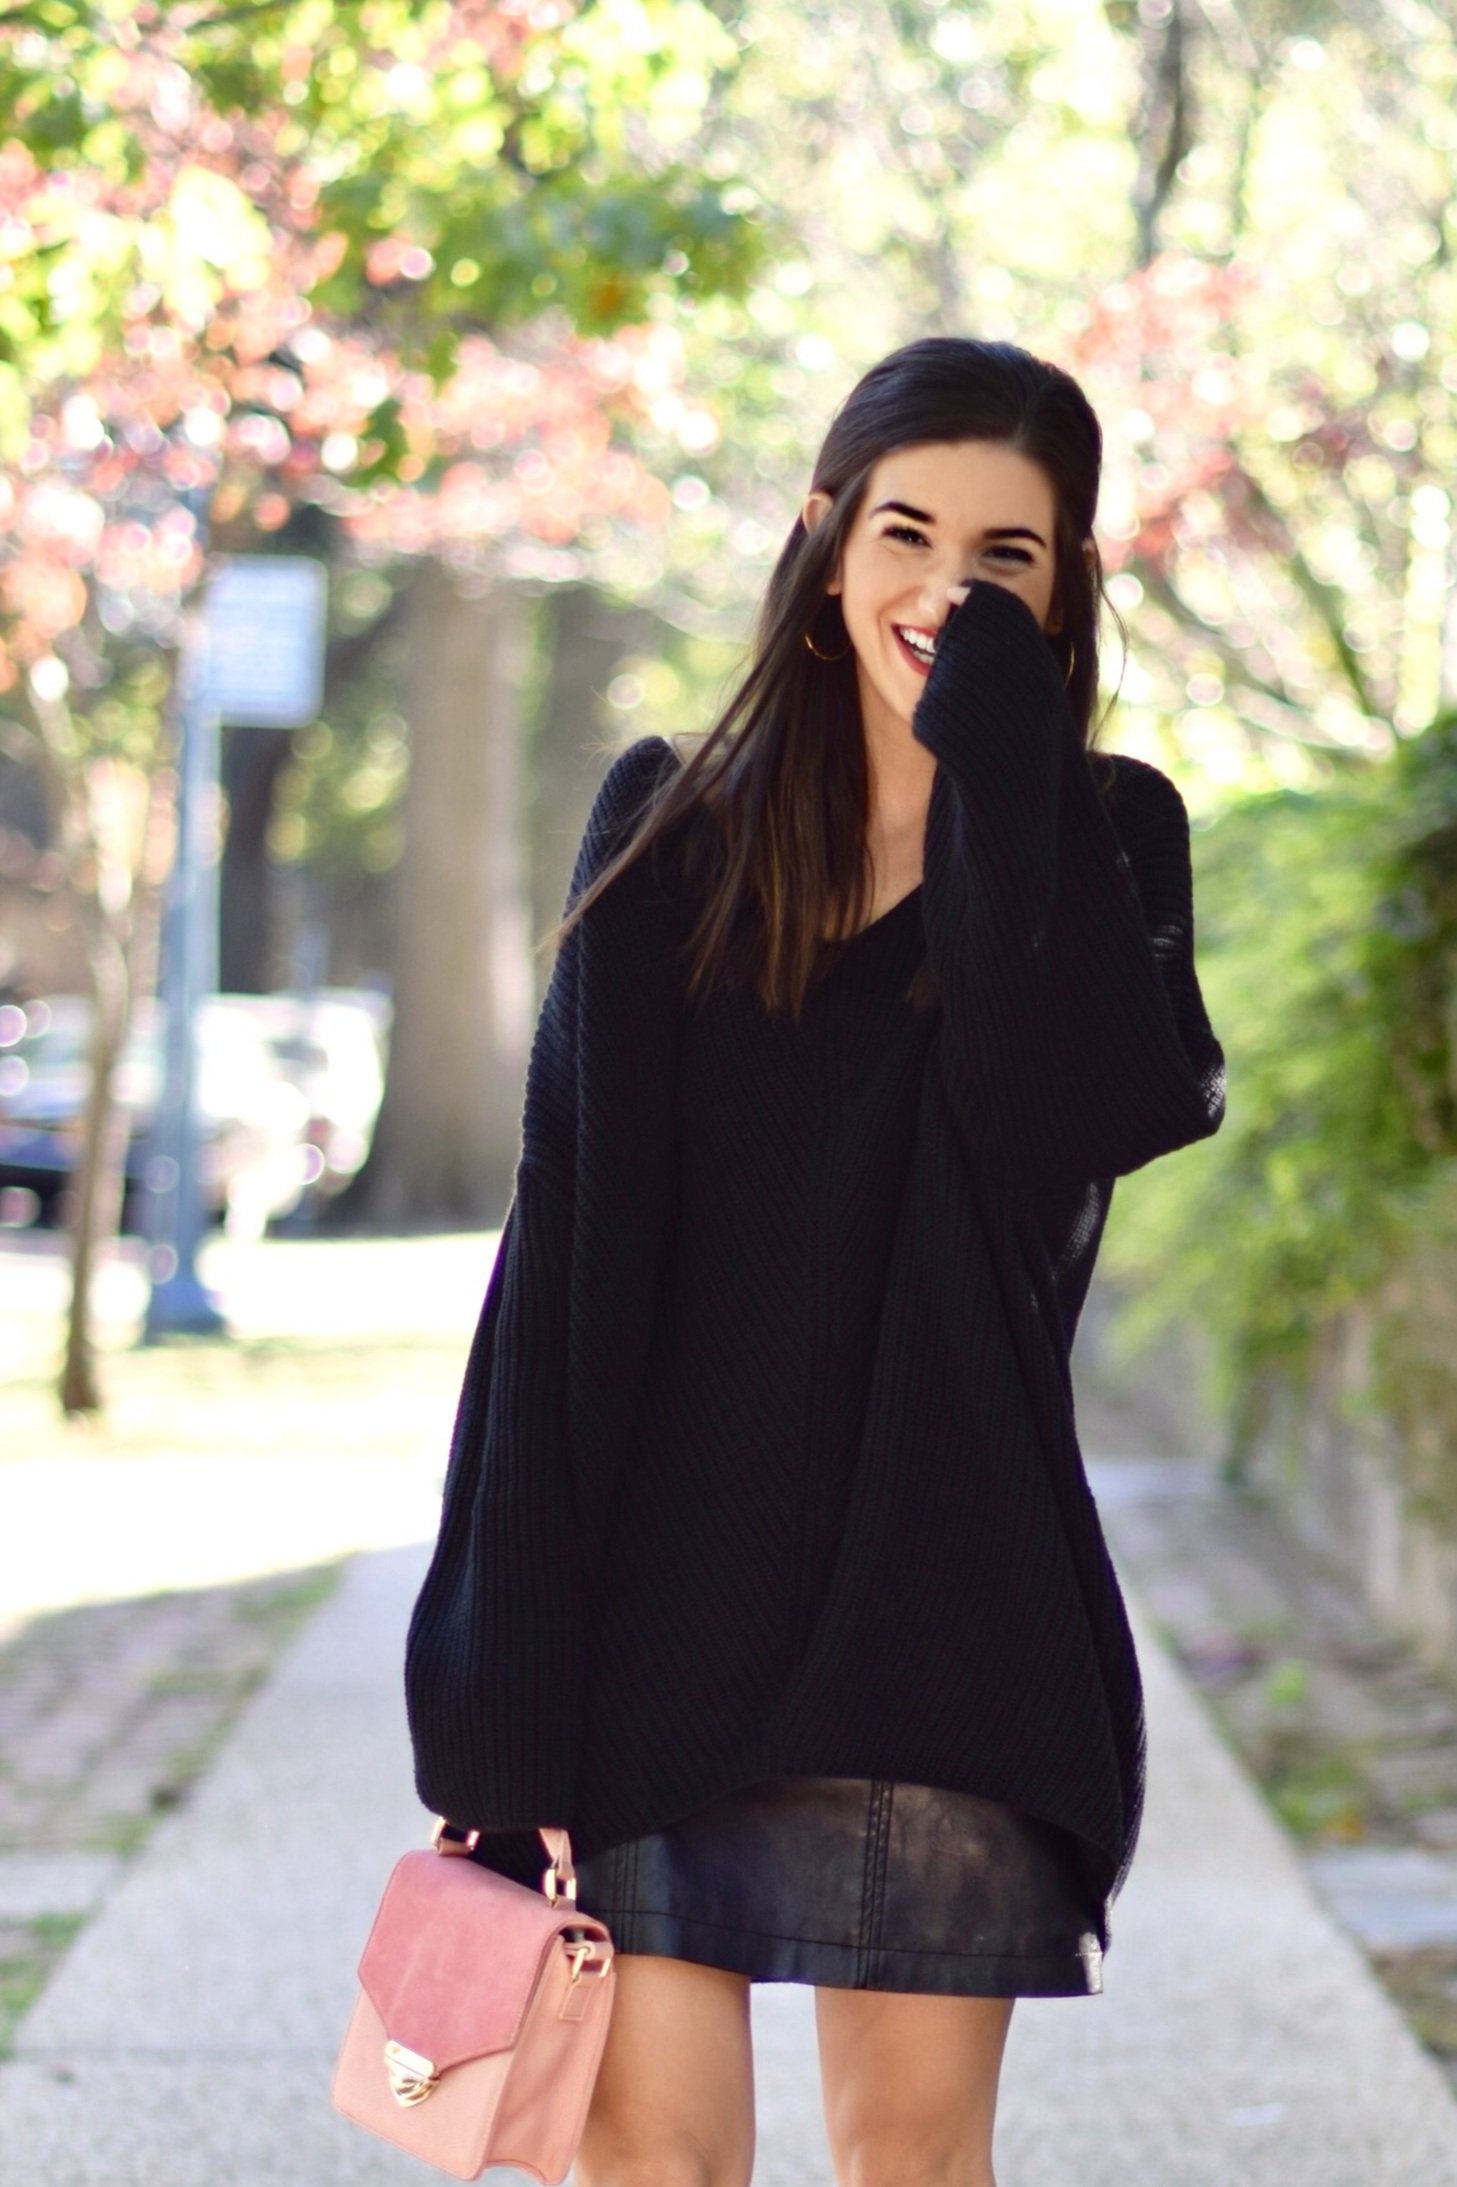 Oversized+Black+Sweater+Star+Combat+Boots+10+Holiday+Gift+Ideas+Esther+Santer+Fashion+Blog+NYC+Street+Style+Blogger+Outfit+OOTD+Trendy+All+Black+Fall+Winter++Look+Comfortable+Cozy+Urban+Outfitters+Shopping+Girl+Feminine+Women+Shoes+Pink+Handbag+Pretty.jpg